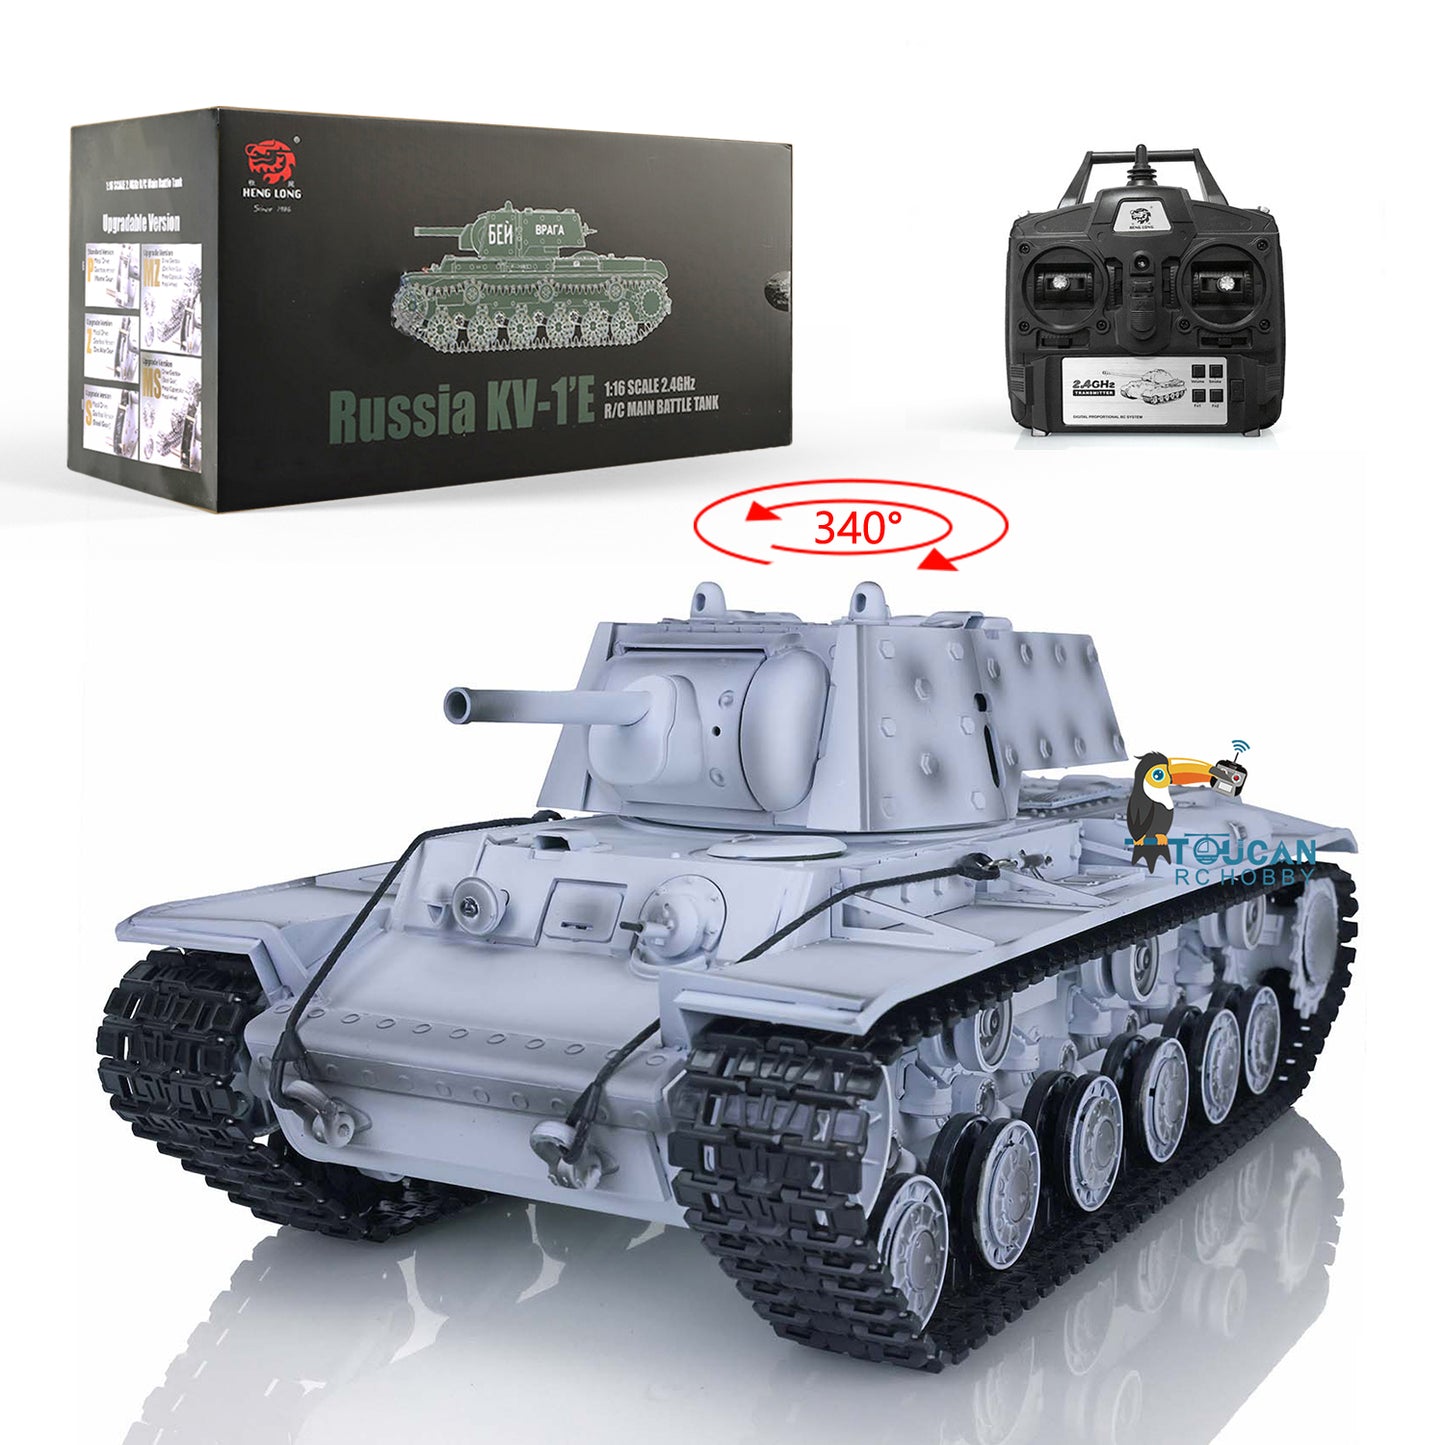 Henglong 1/16 Scale 7.0 3878 Upgraded Remote Control Tank RTR RC Tank w/ FPV Smoking 360Degrees Rotating Turret Metal Idler Sproket